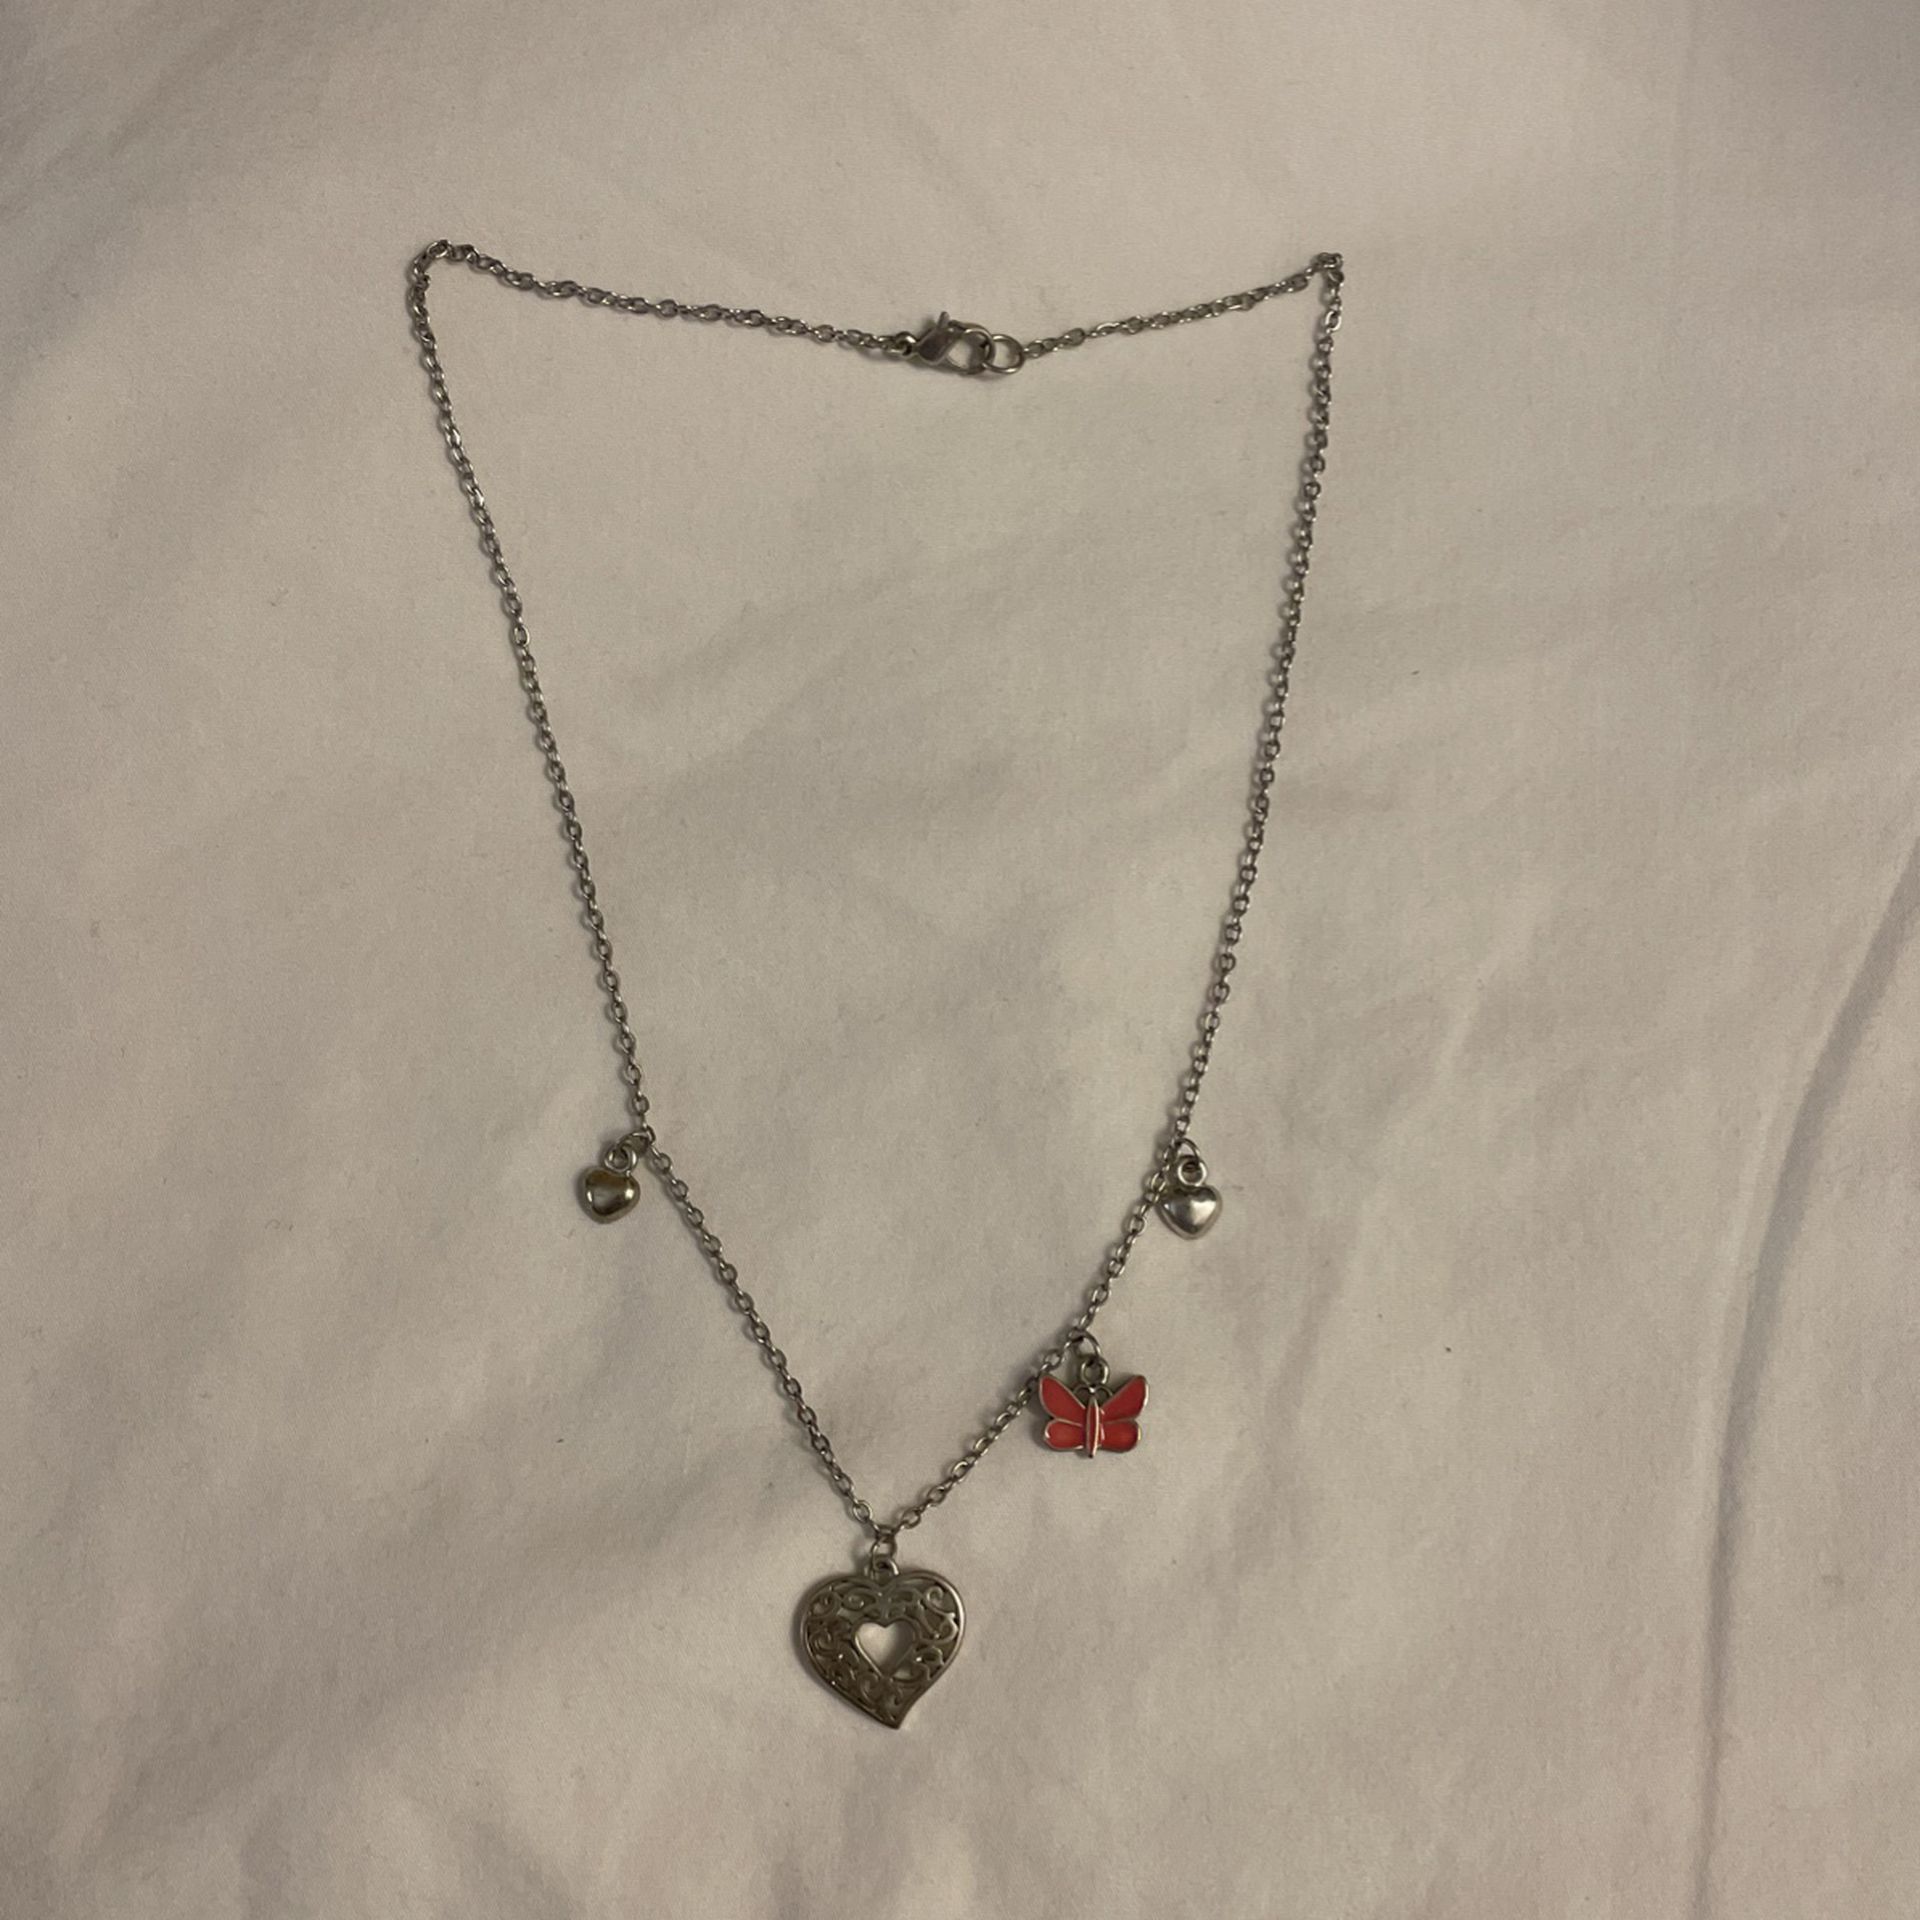 Silver Necklace With Hearts And Butterfly $18 Or Best Offer 